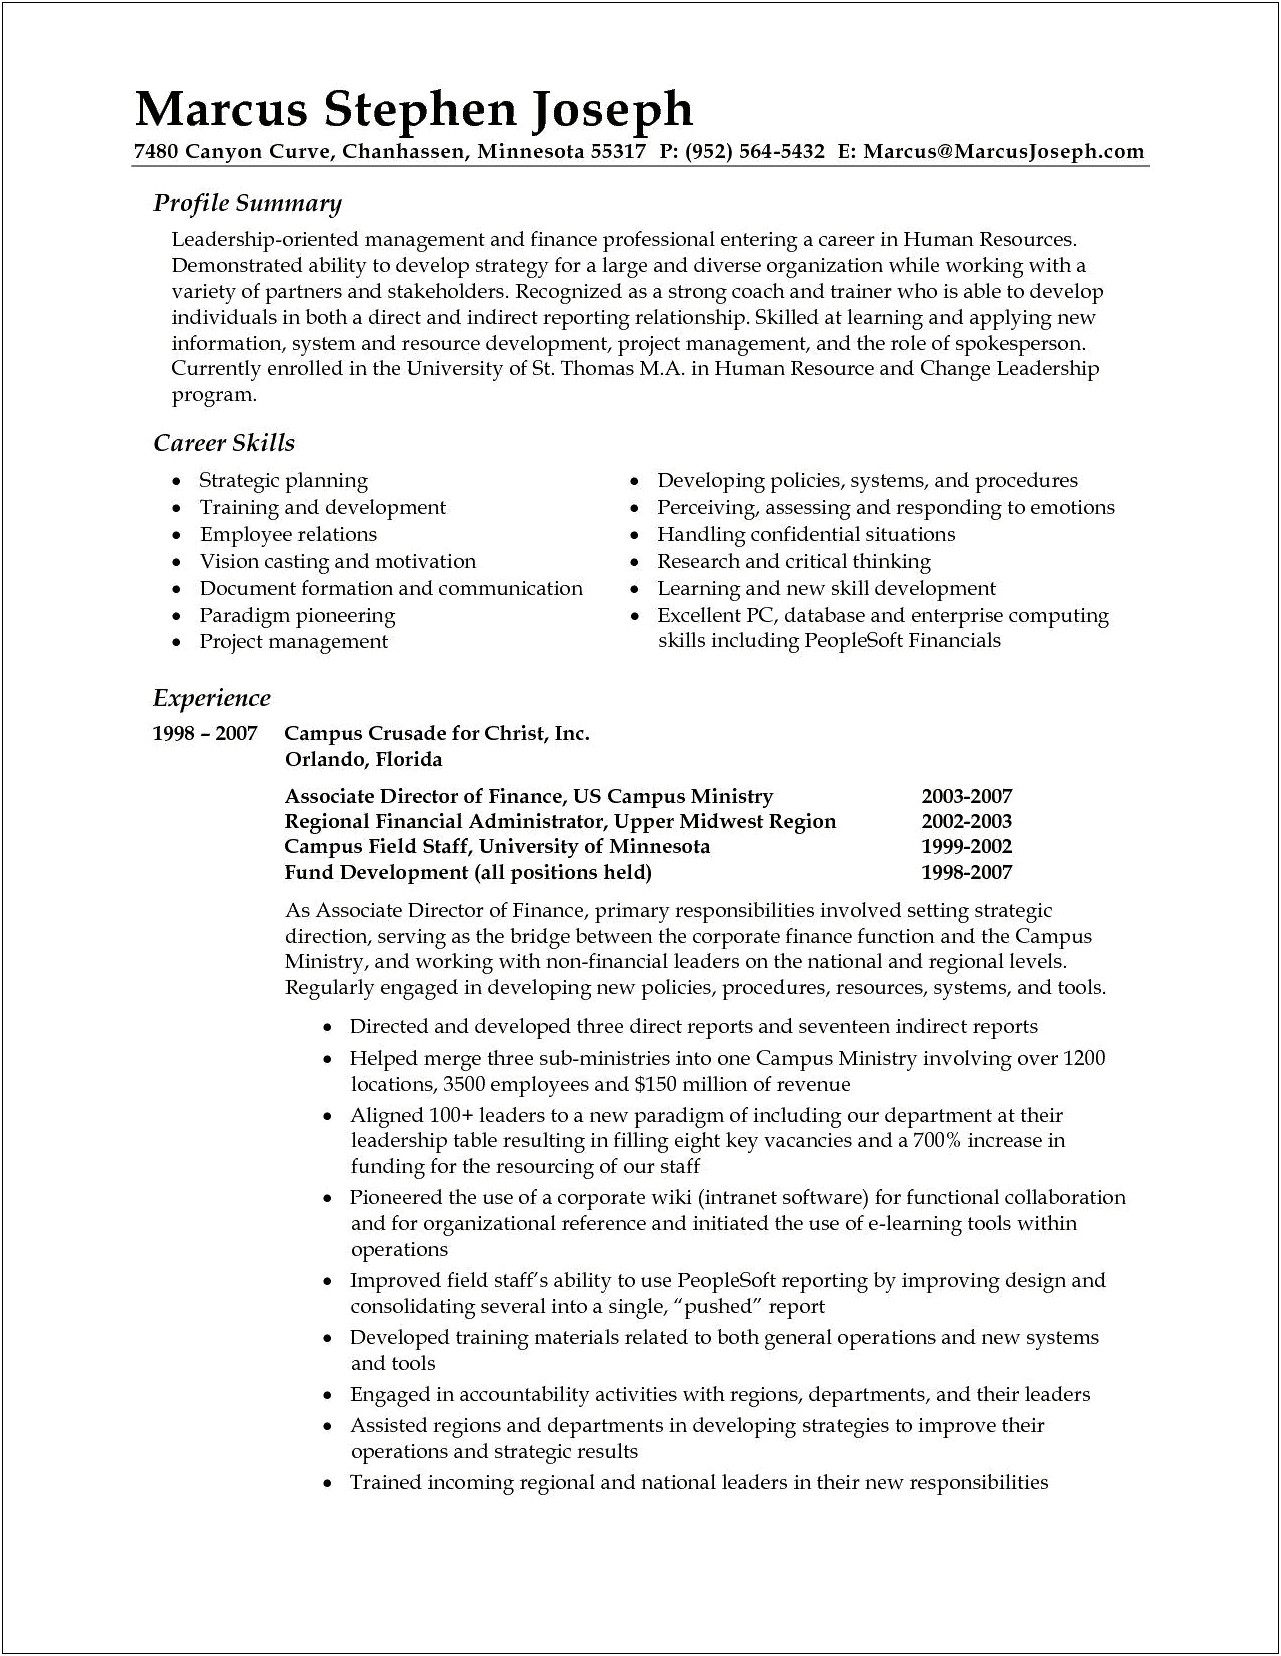 Job Summary For Resume Examples